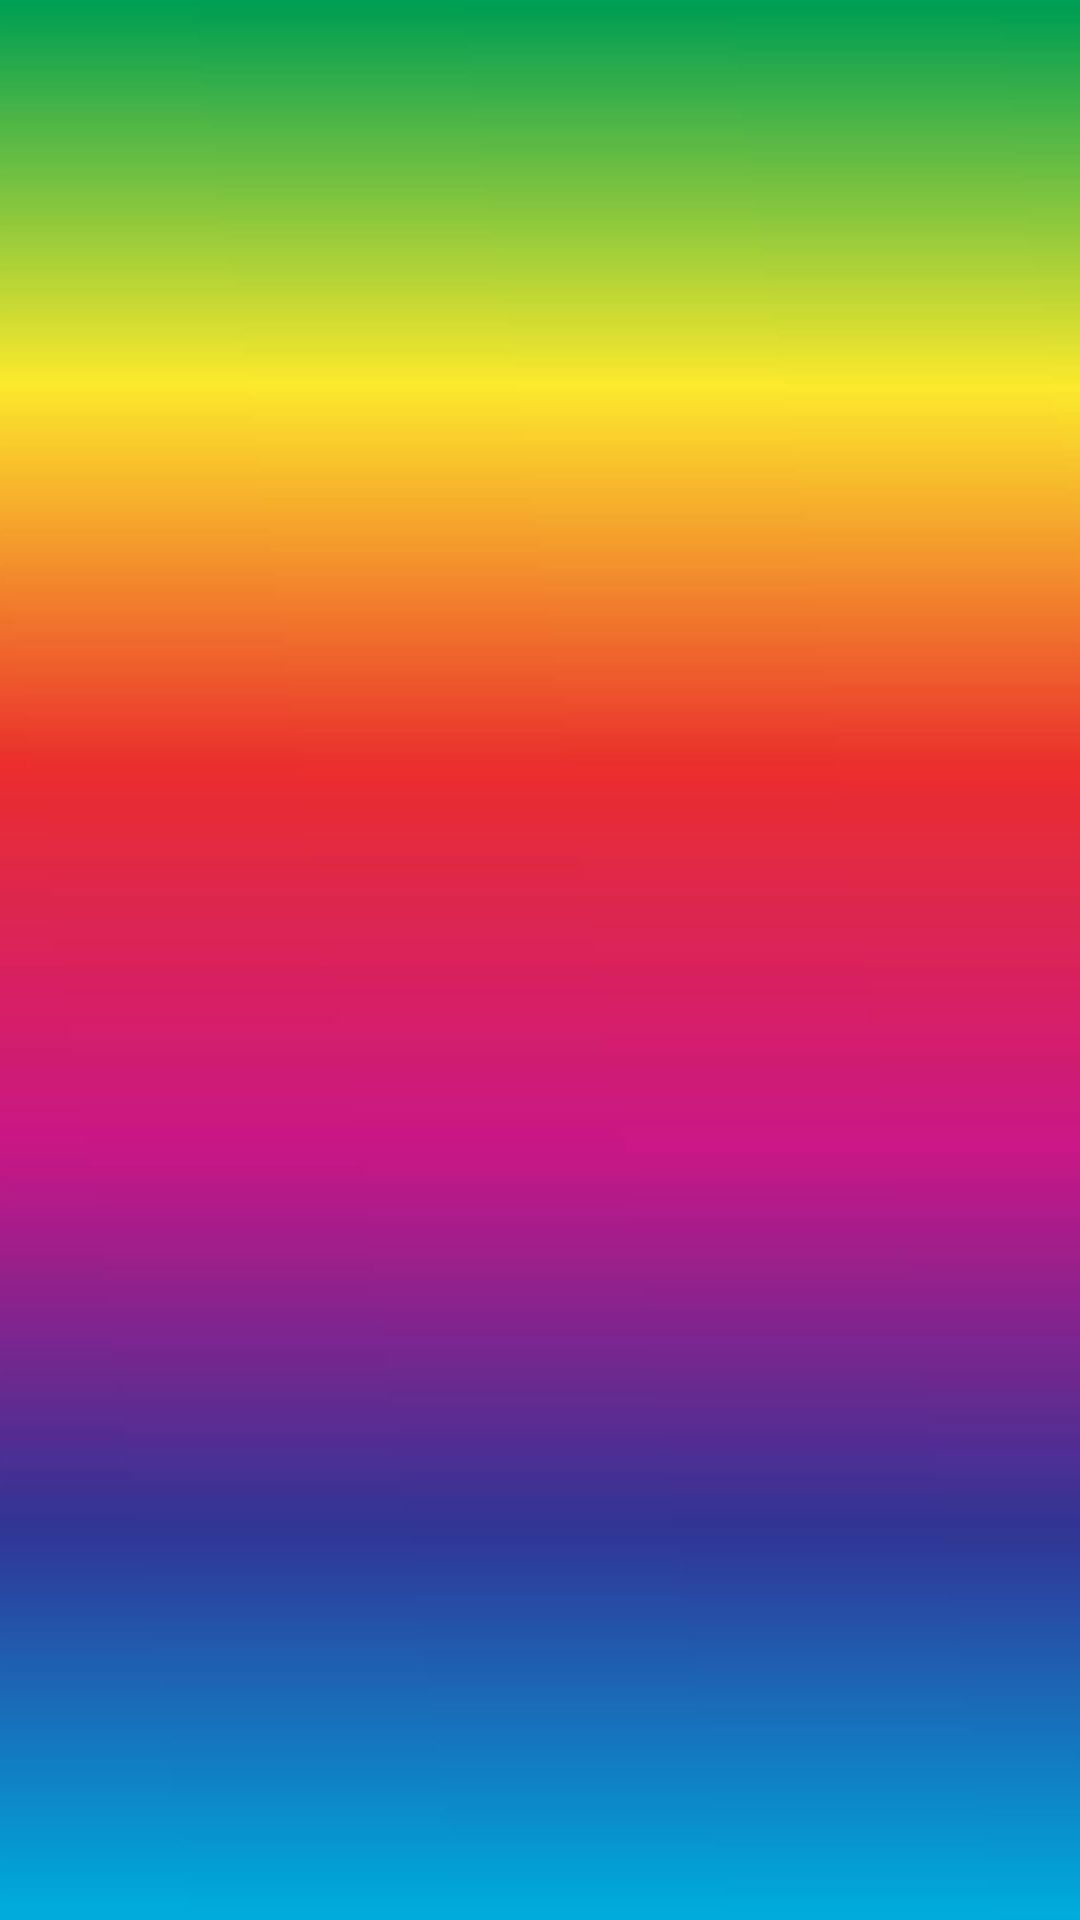 1080x1920 Pin by Emma on Fondos | Rainbow color background, Rainbow wallpaper, Ombre wallpaper iphone